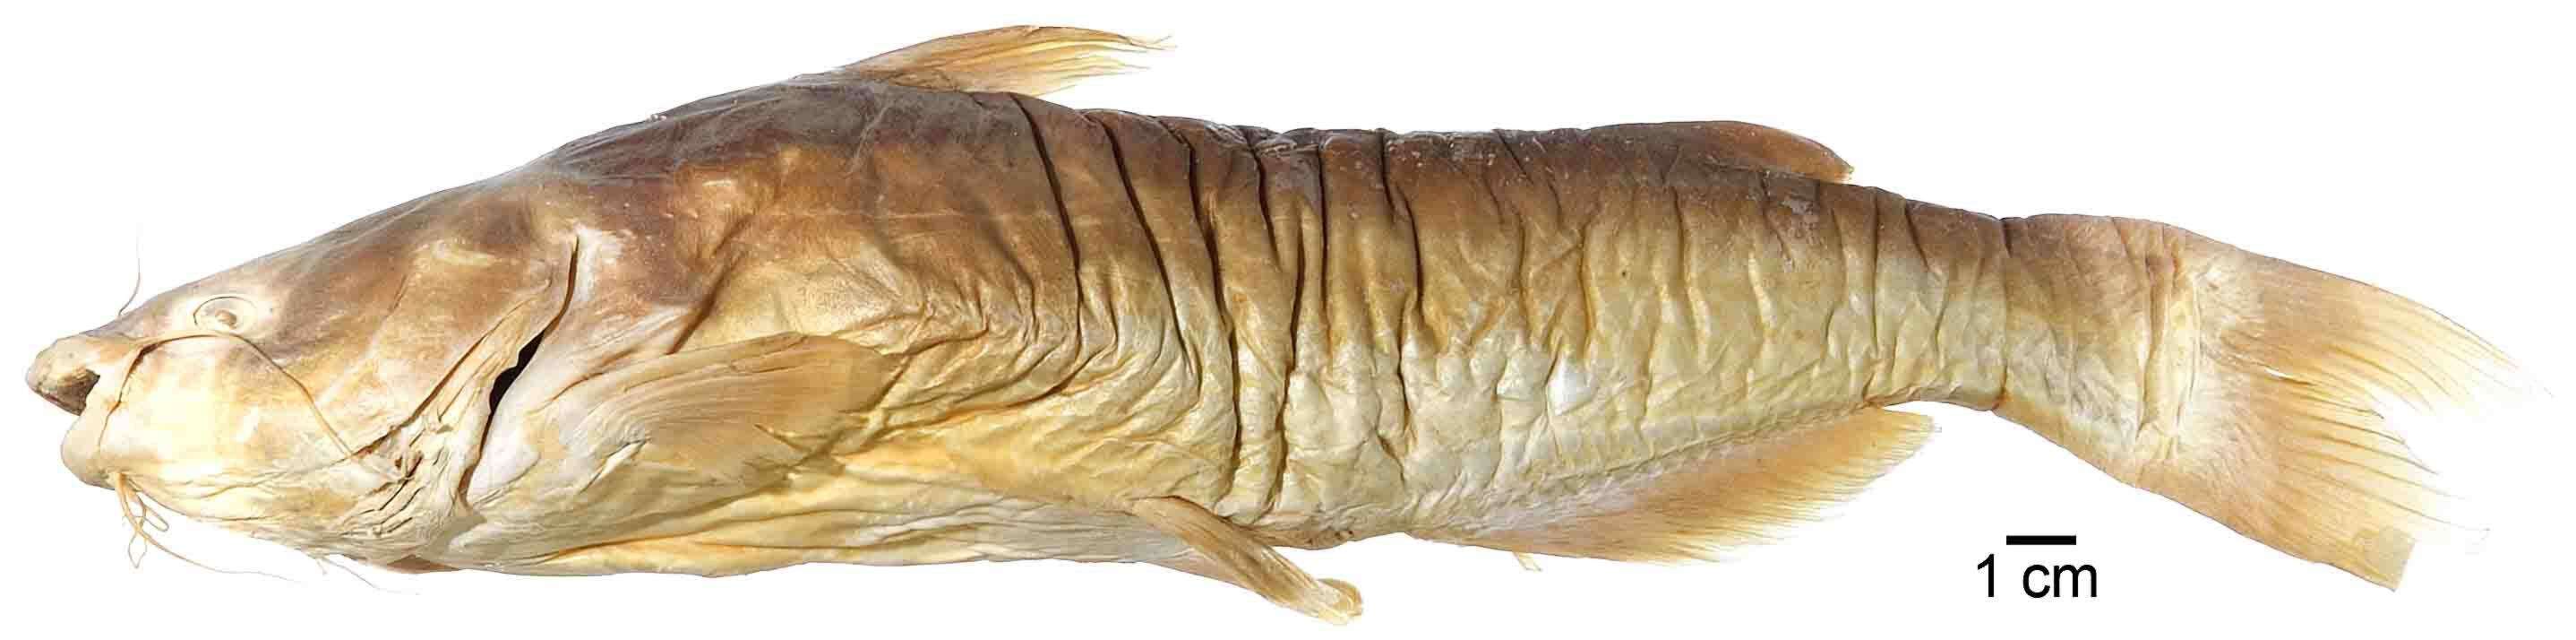 Image of North American freshwater catfishes